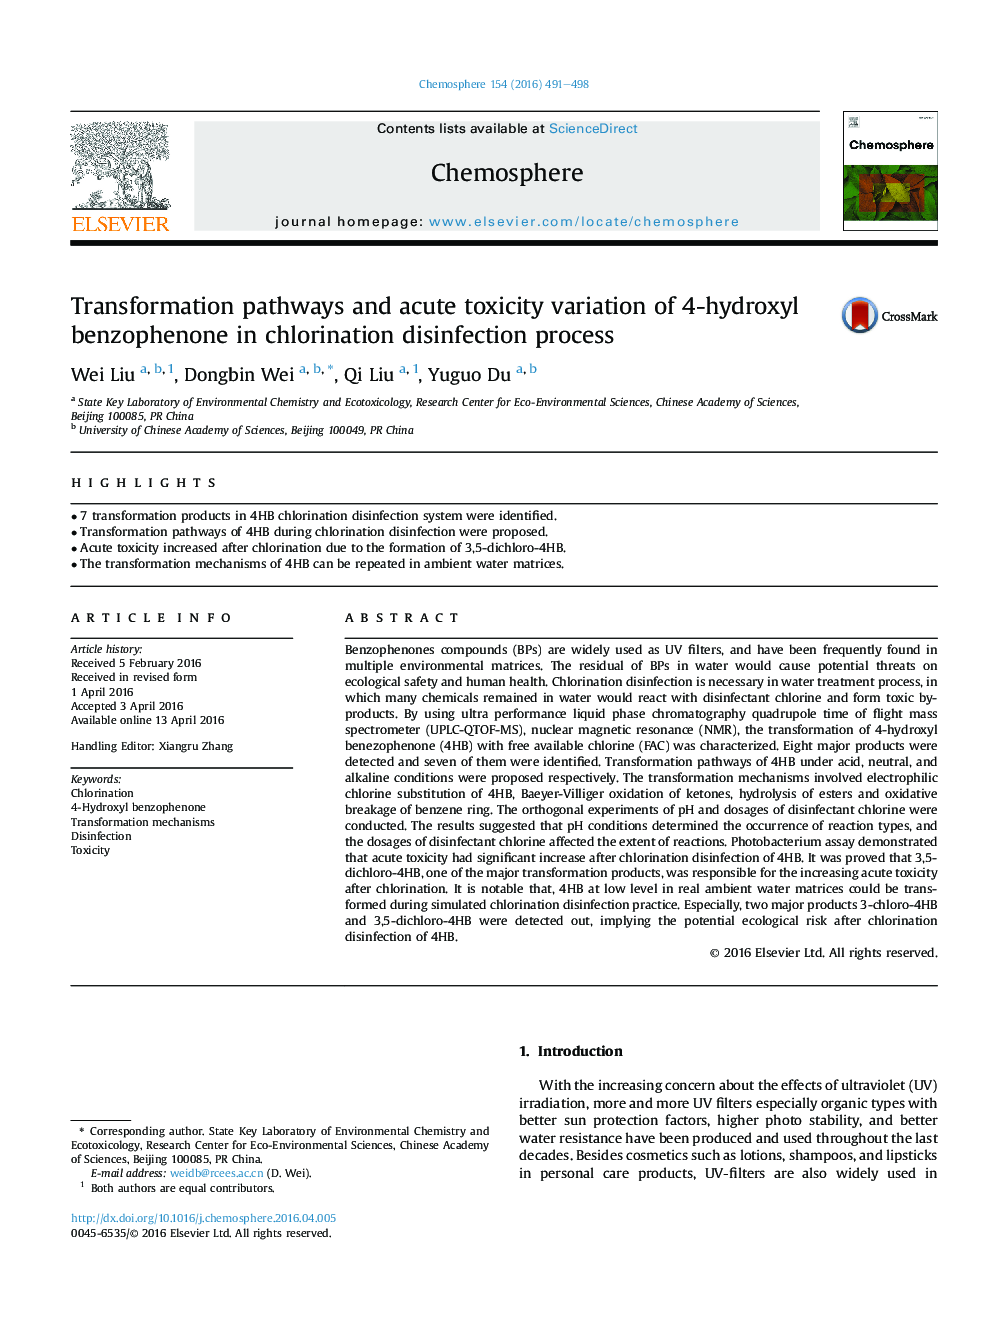 Transformation pathways and acute toxicity variation of 4-hydroxyl benzophenone in chlorination disinfection process